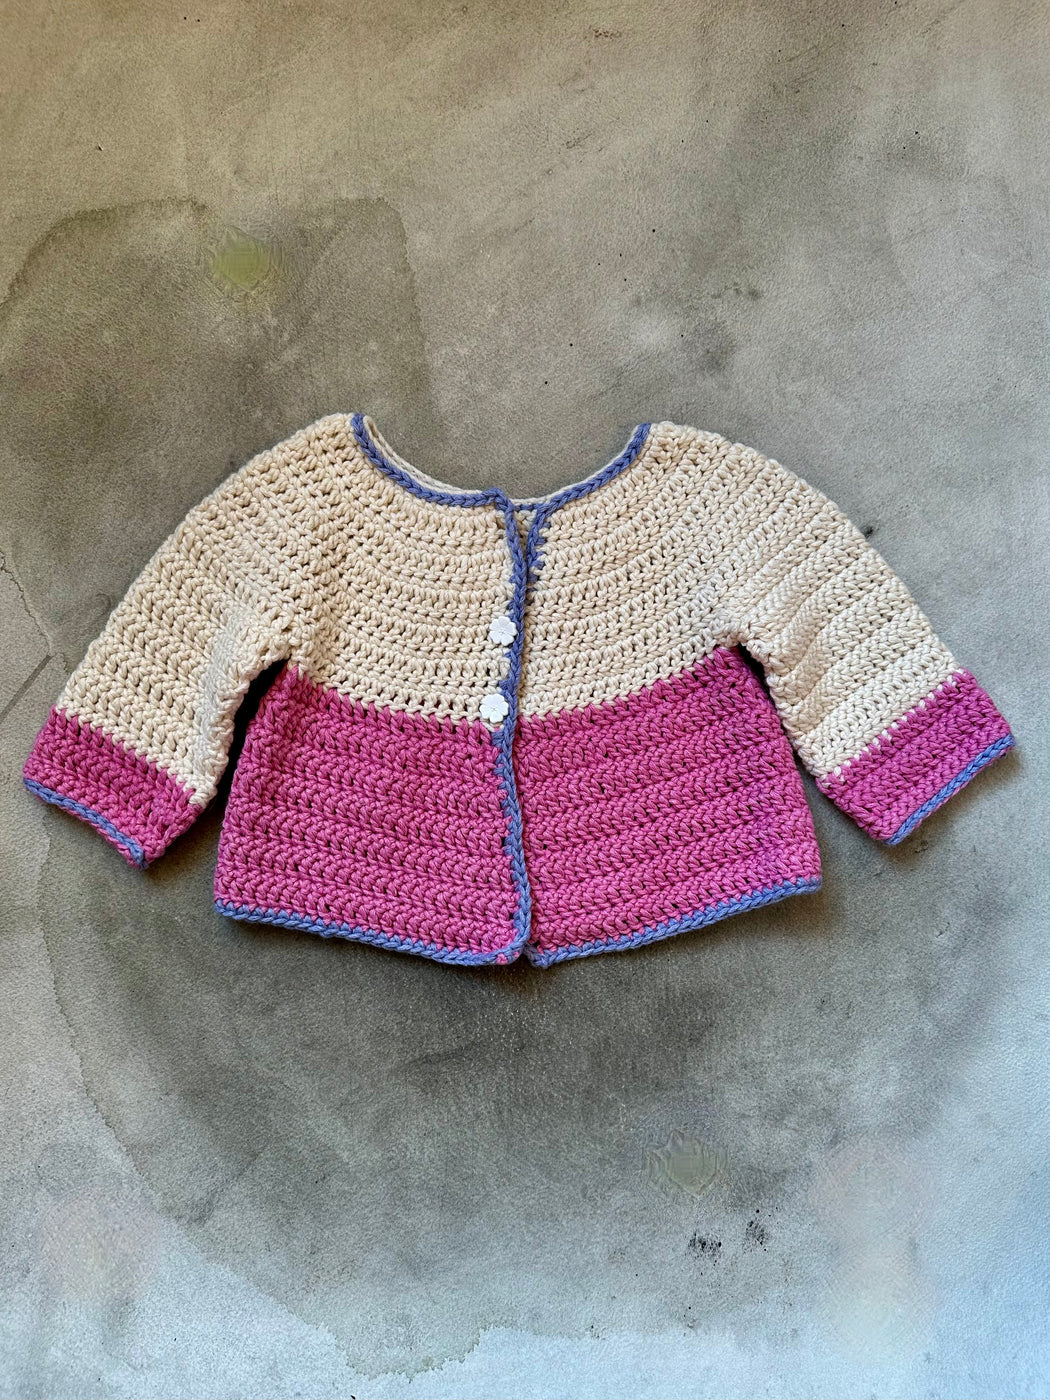 "Orchid" Hand-Crocheted Baby Sweater by Albo